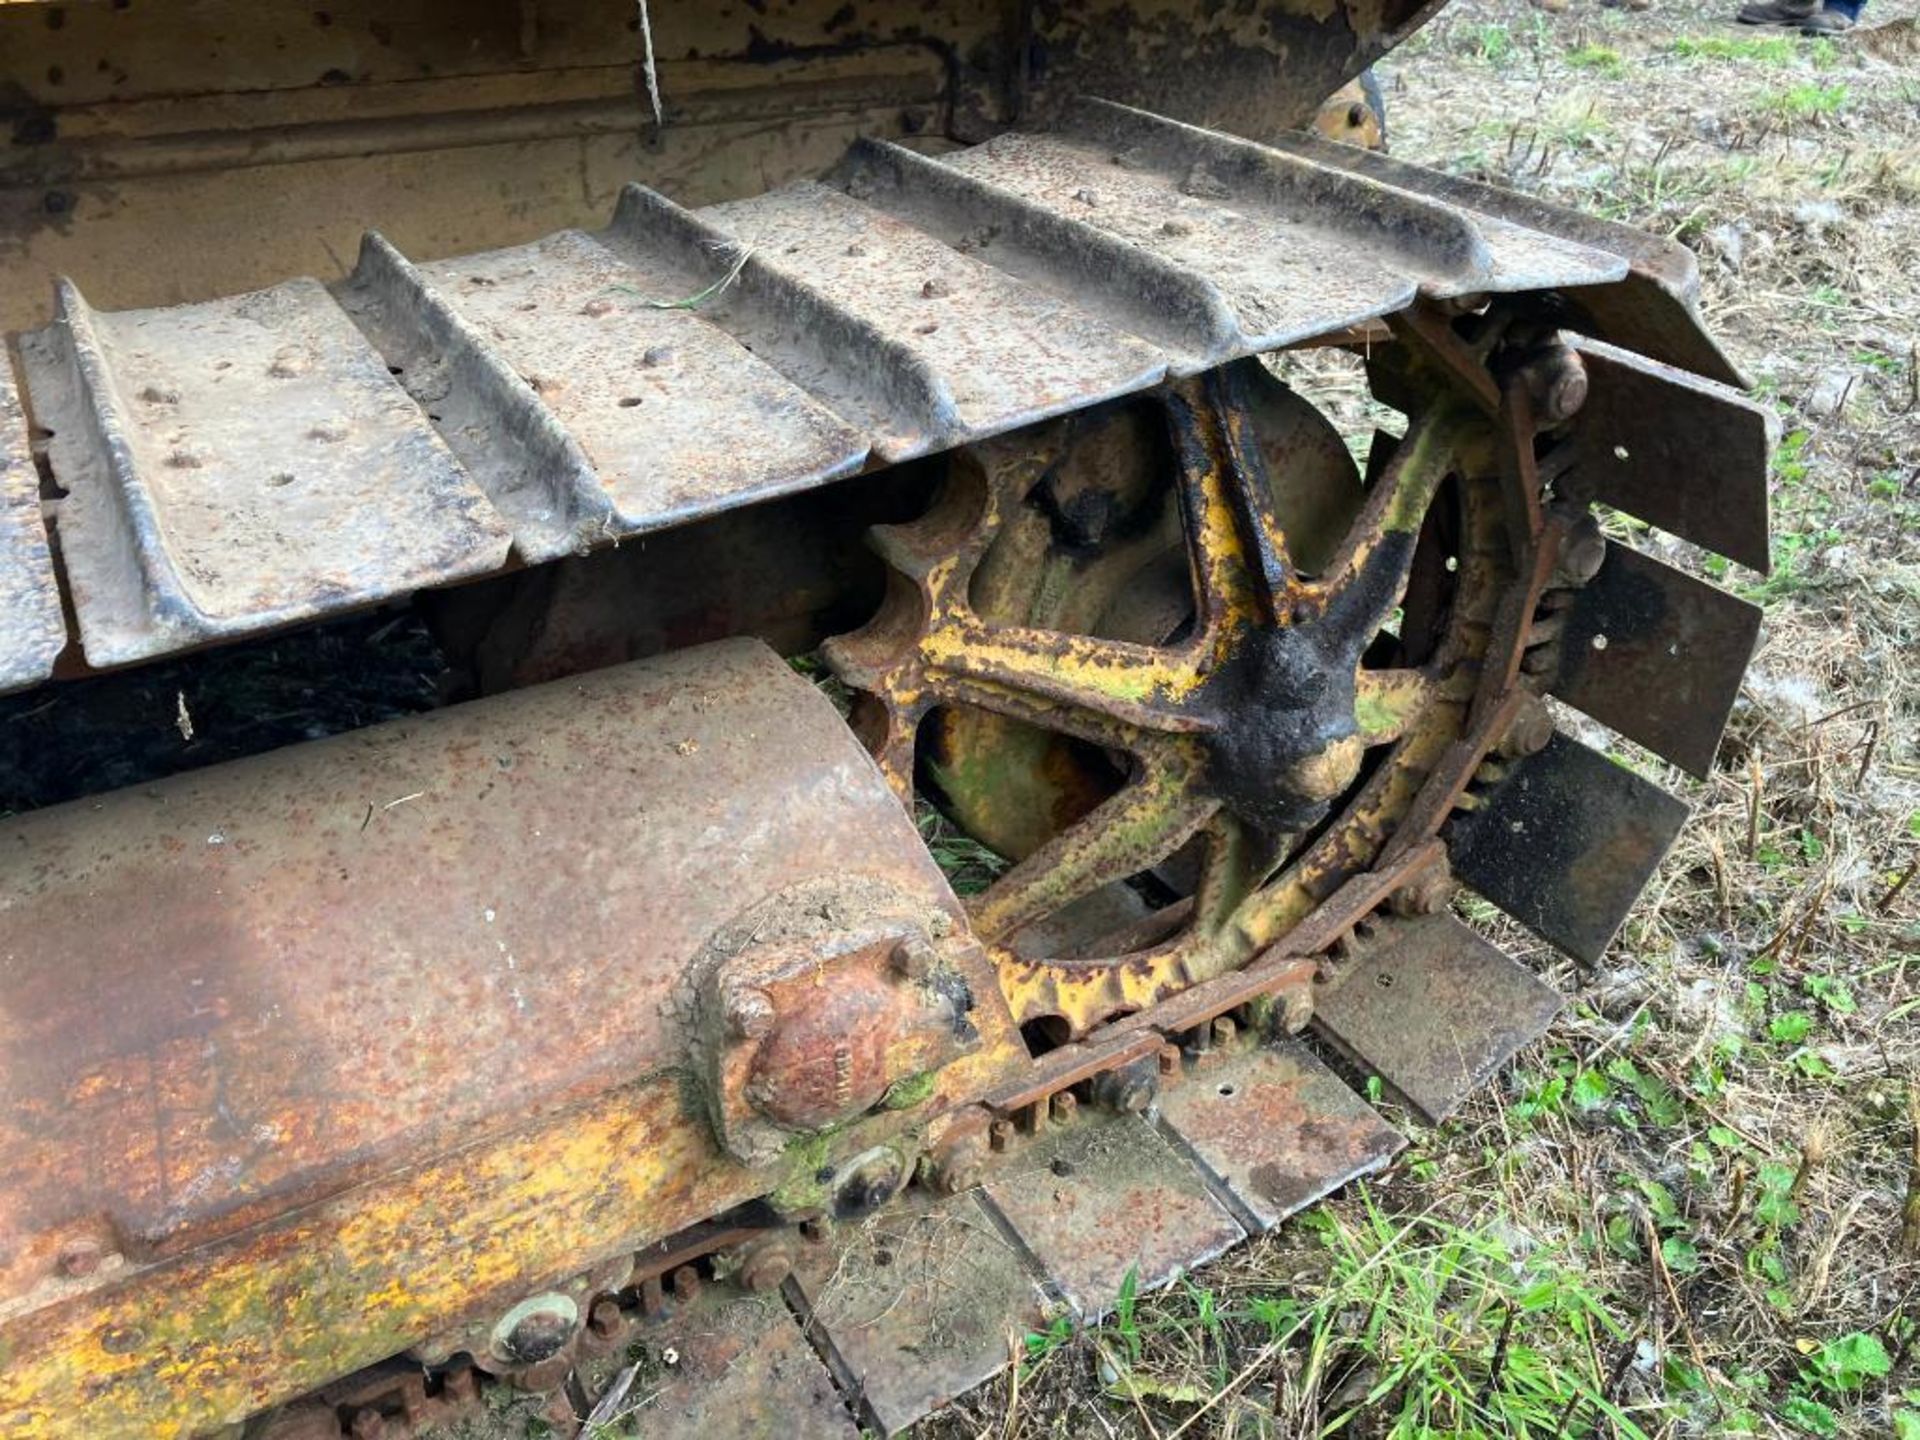 1941 Caterpillar D2 metal tracked crawler with 16" tracks, rear swinging drawbar and belt pulley. Ho - Image 9 of 15